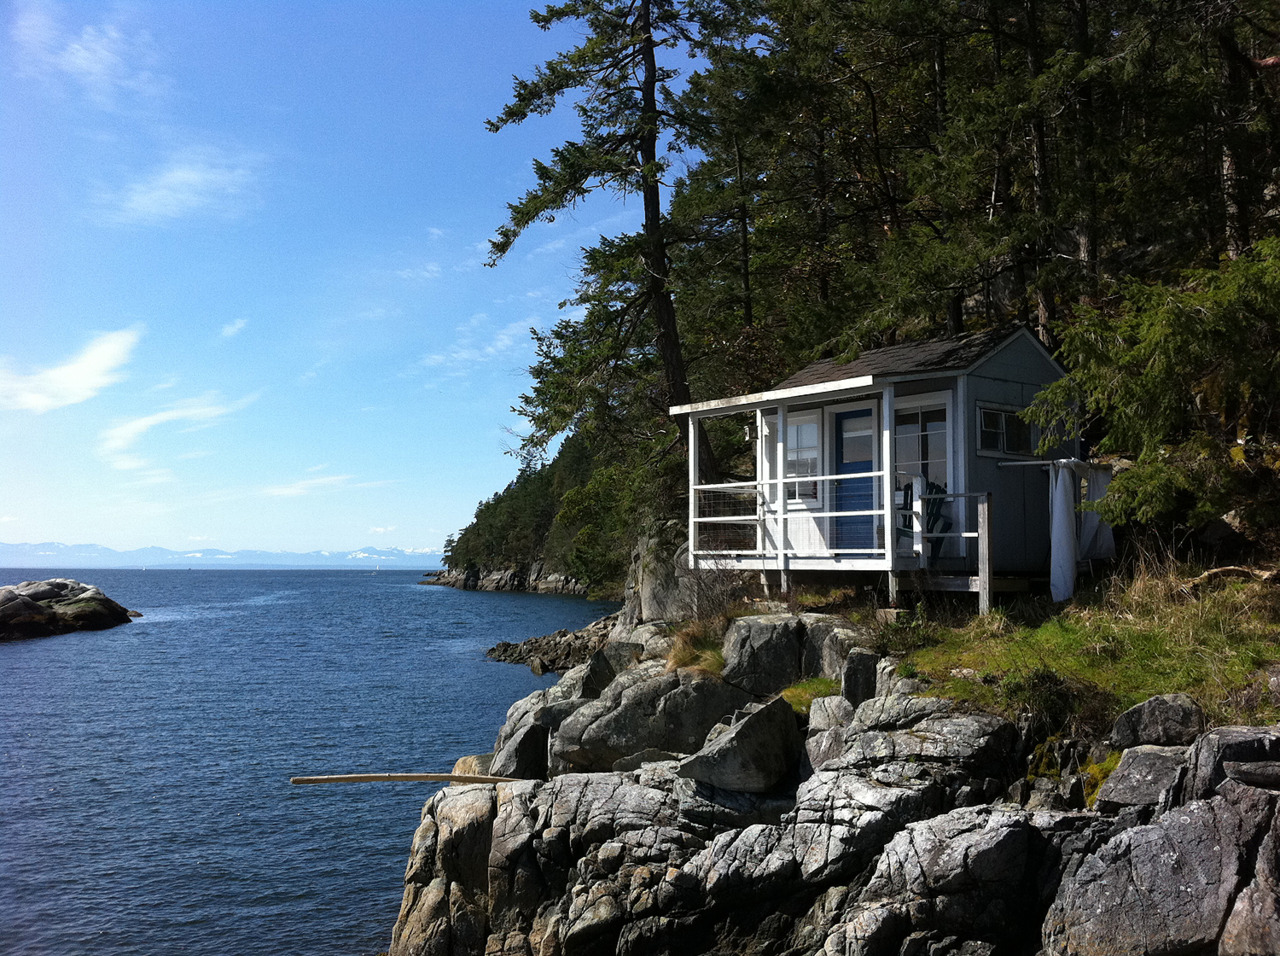 Island cottage north of Vancouver, British Columbia. Submitted by Kim Hadley. (click to enlarge)